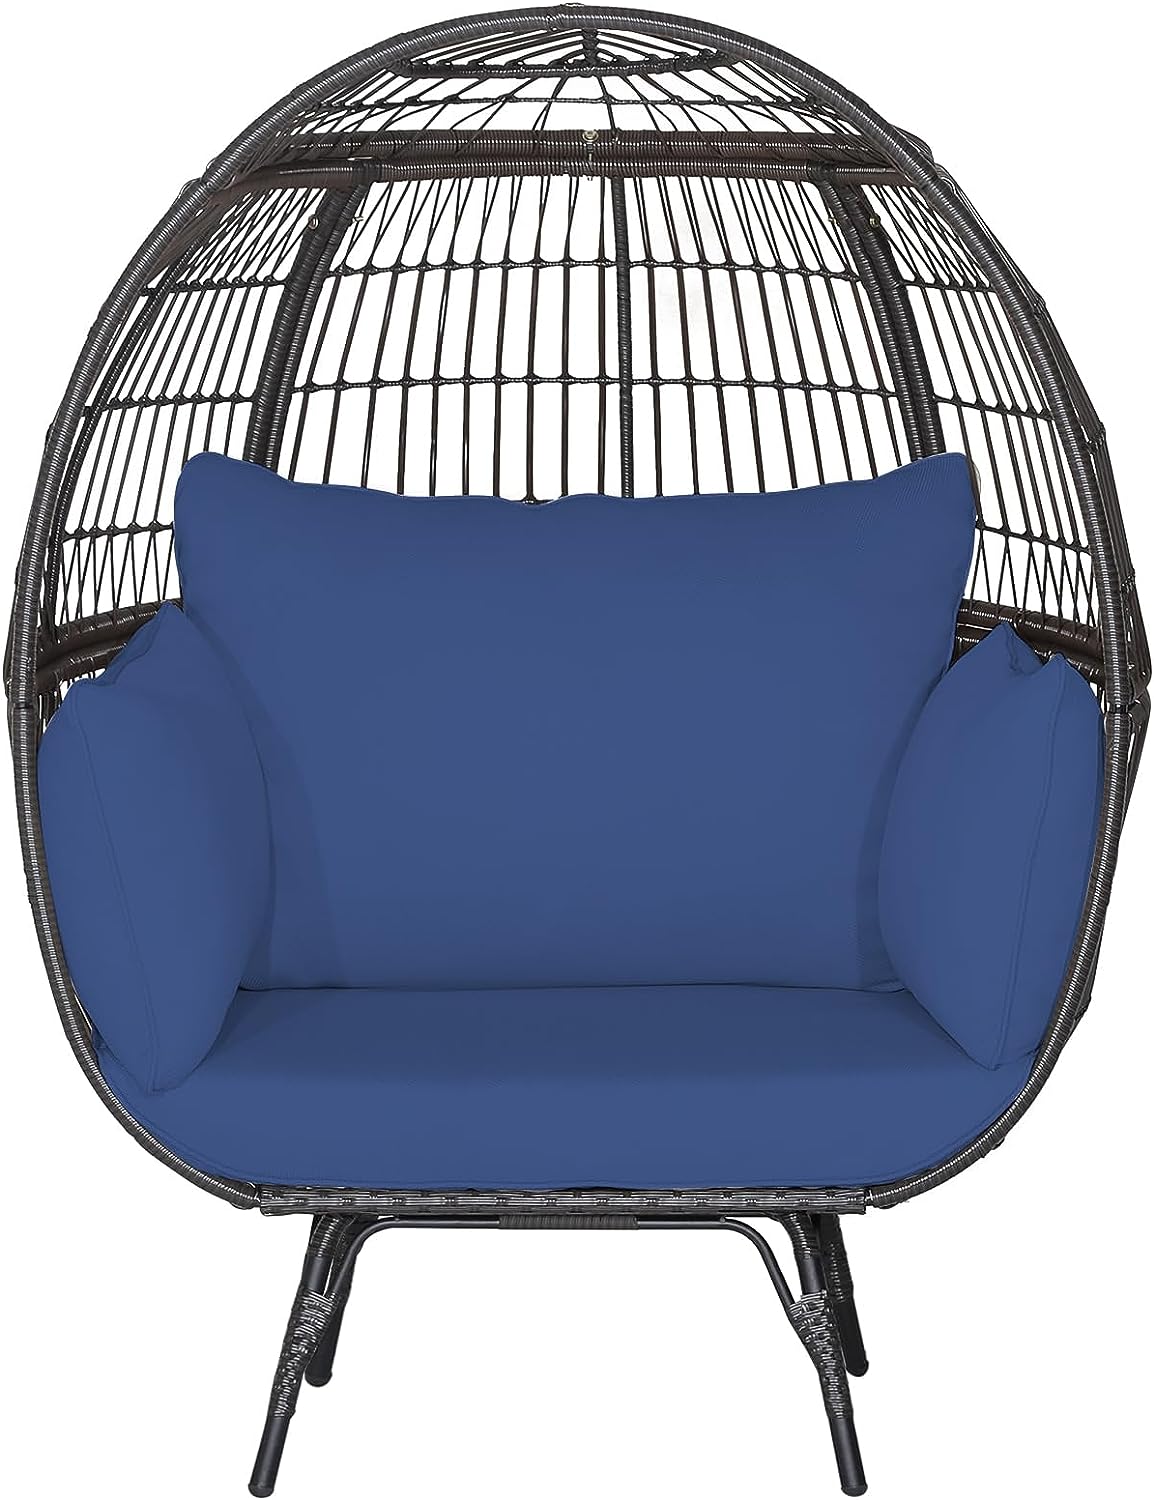 Giantex PE Rattan Egg Chair - Oversized Hammock Chair with Thick Cushions & Sturdy Metal Frame